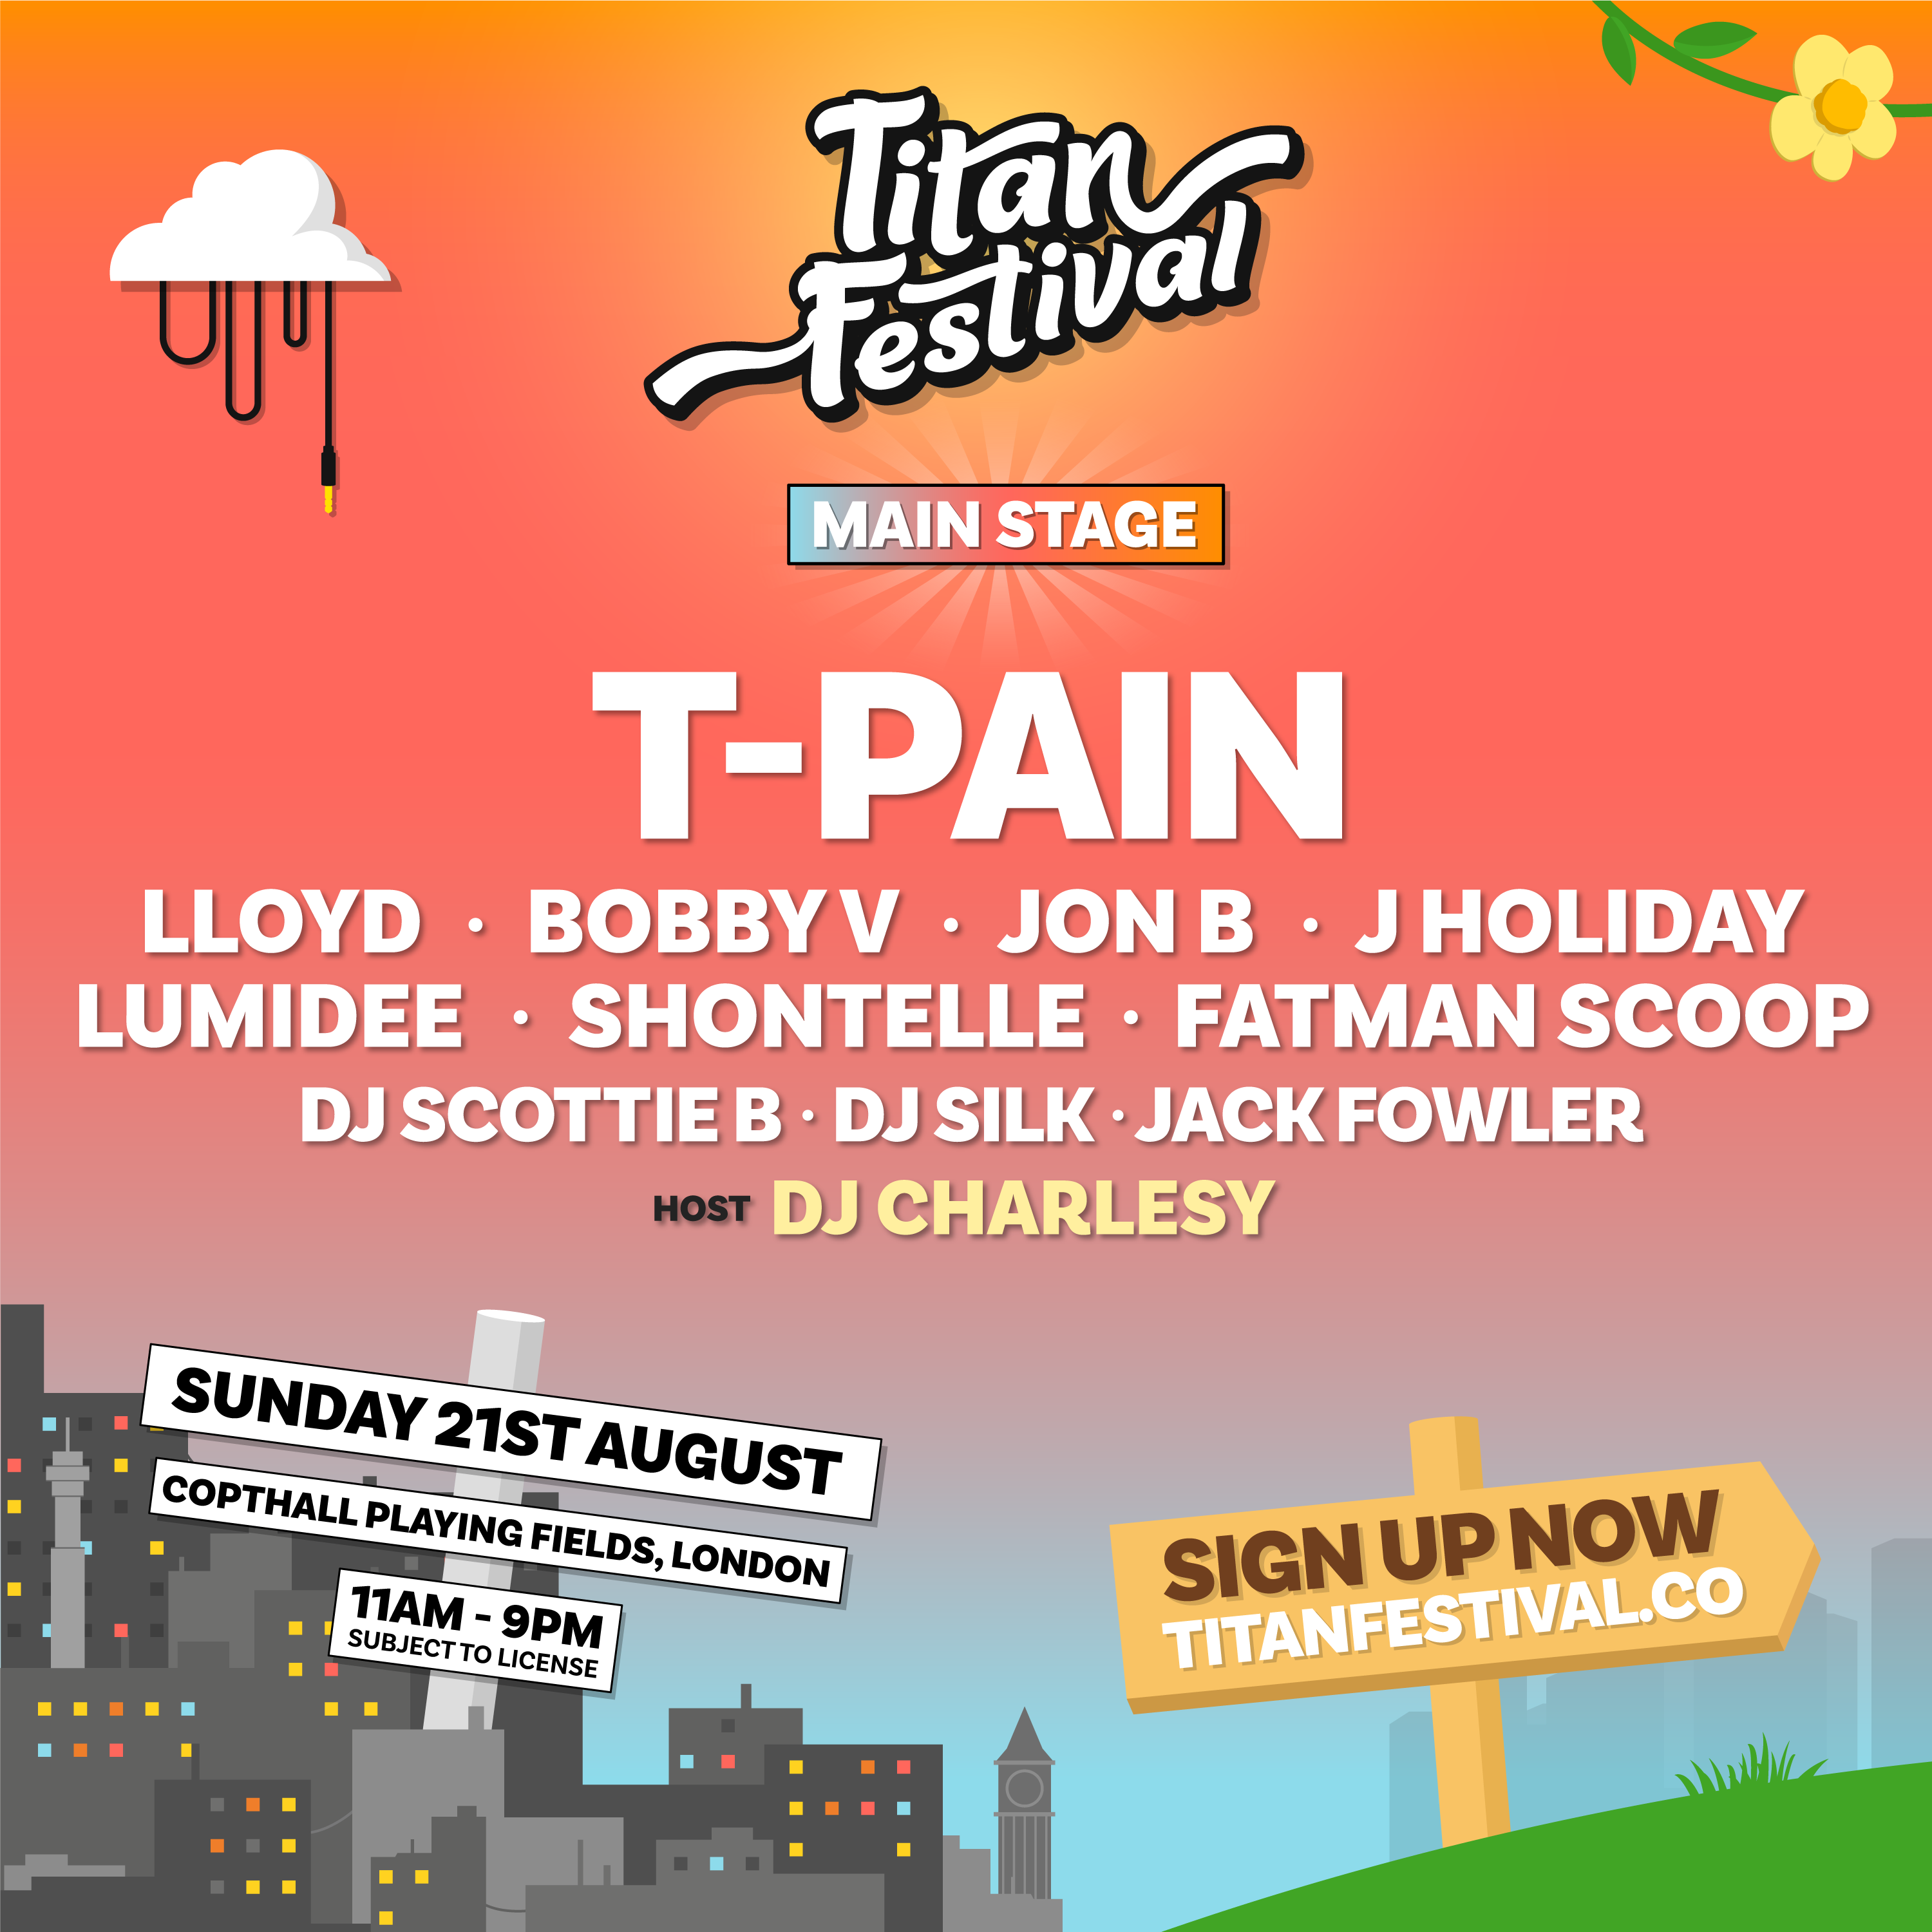 THE CREATORS OF 51ST FESTIVAL ANNOUNCE THE LINEUP FOR THEIR NEW FESTIVAL TITAN 2022